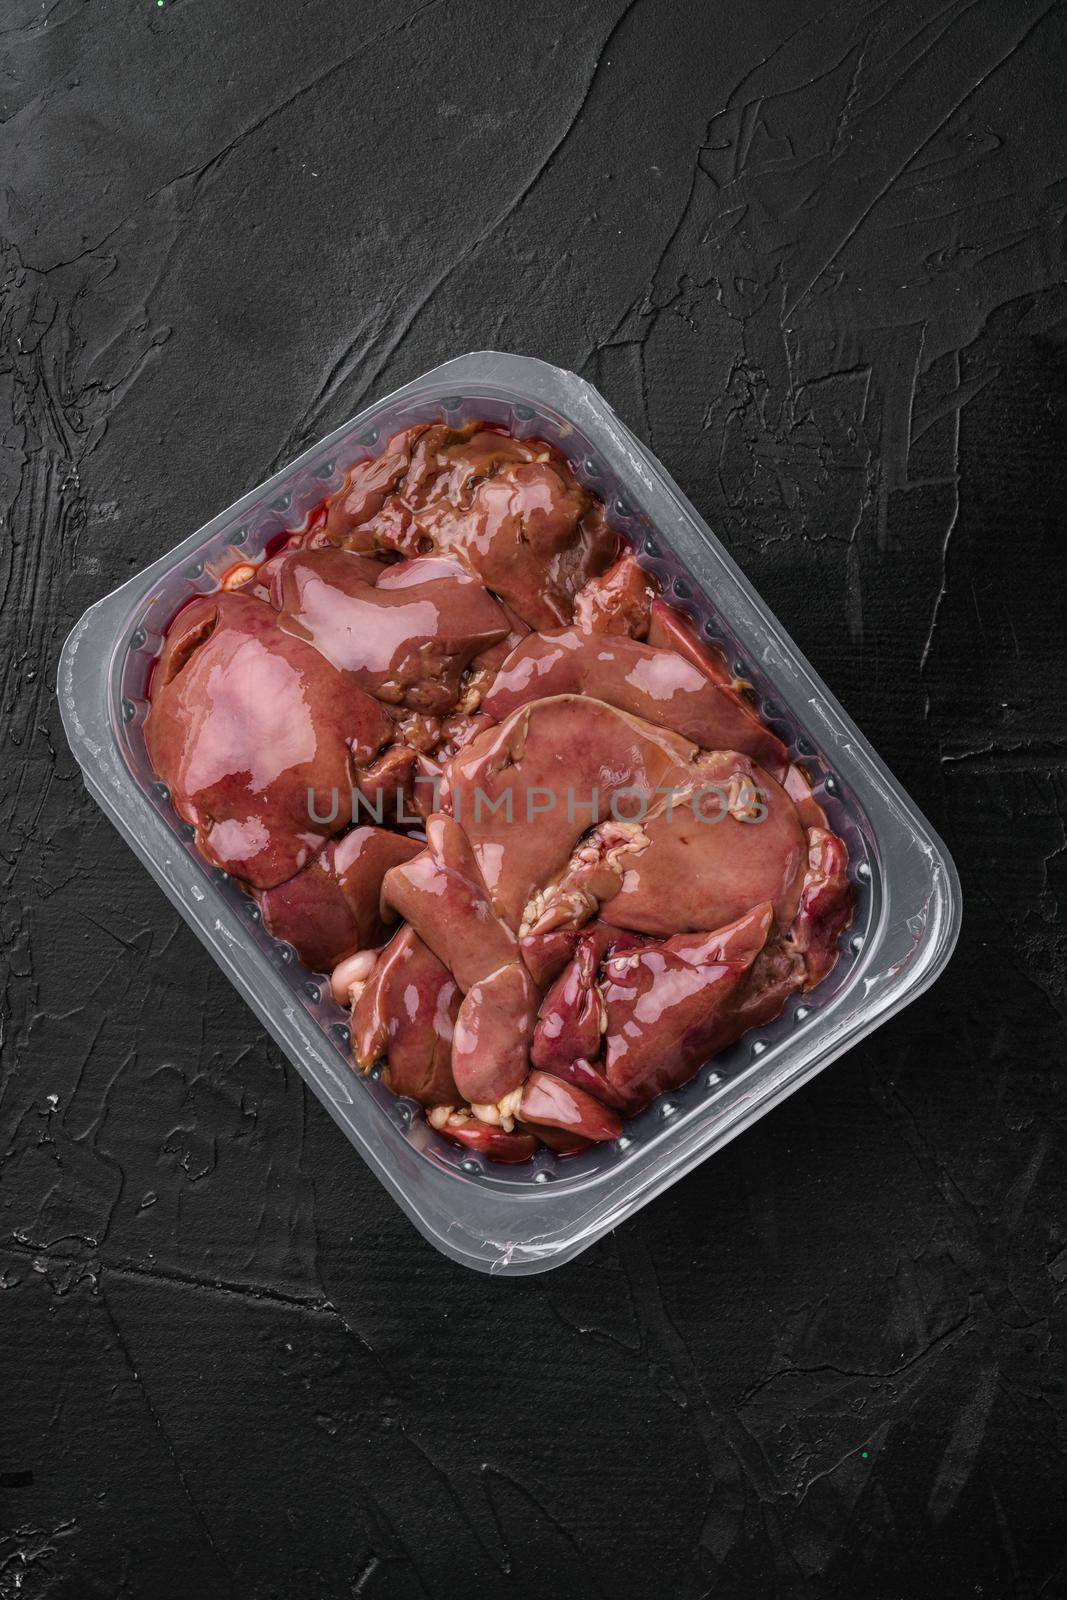 Raw chicken liver in the industrial pack, on black dark stone table background, top view flat lay, with copy space for text by Ilianesolenyi